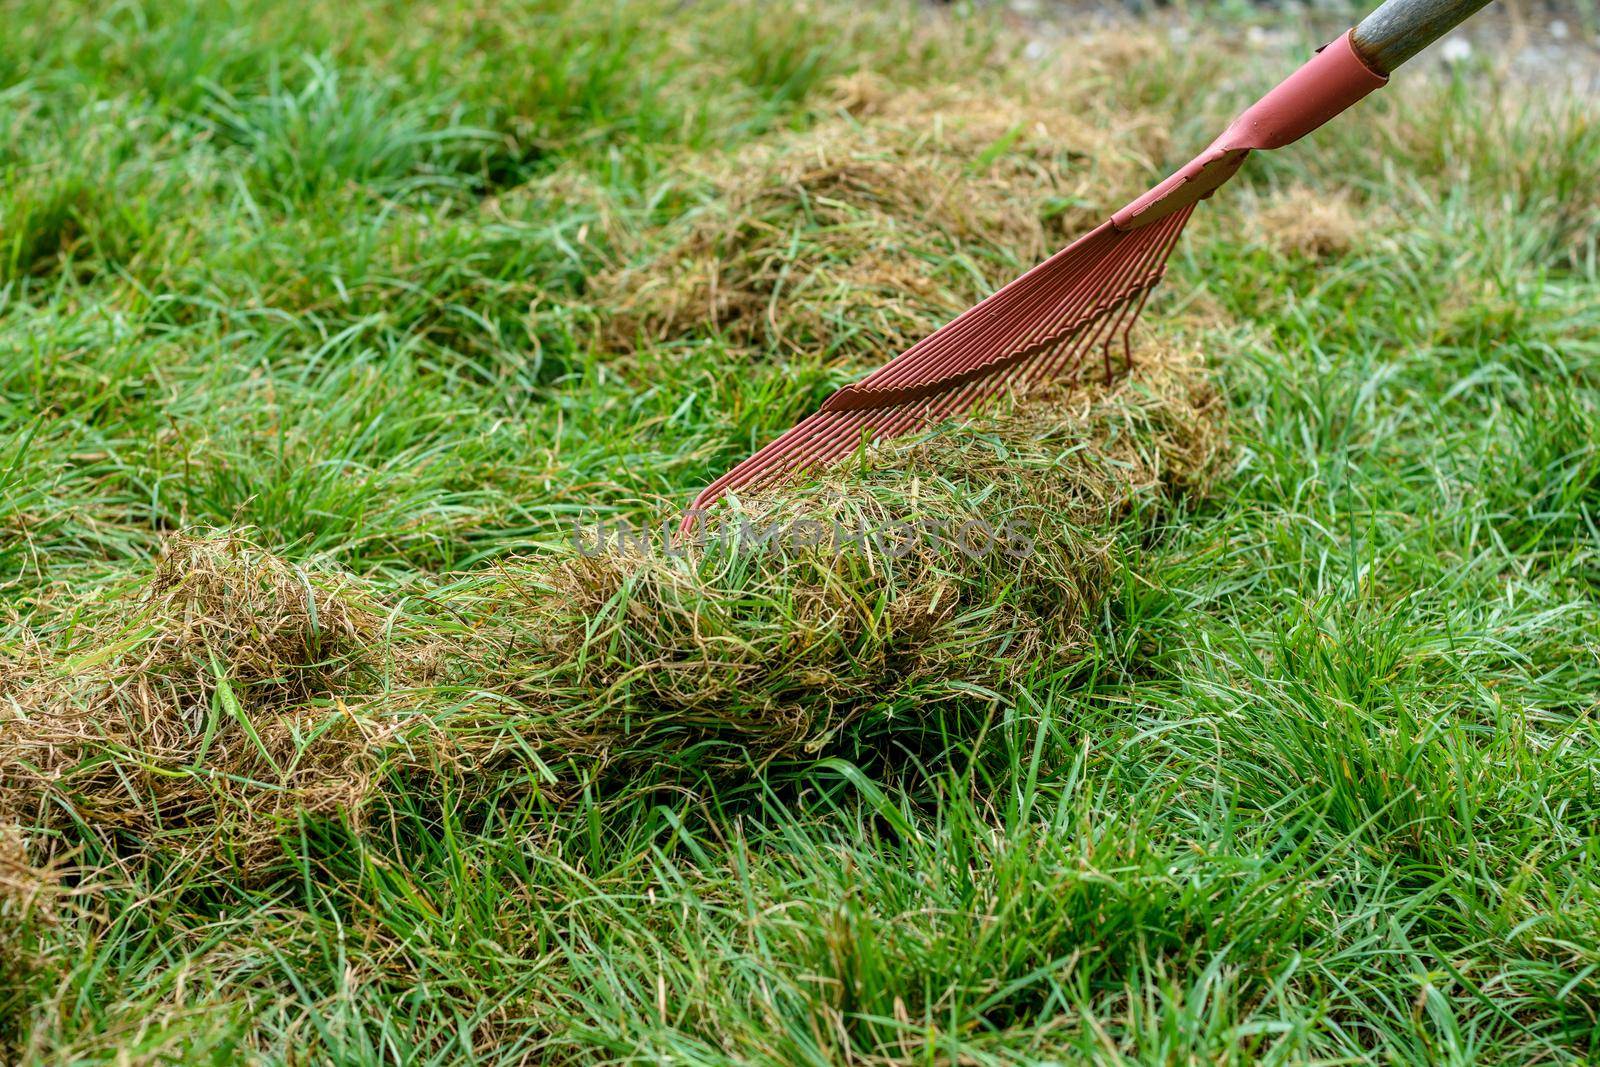 Thinning the lawn in the garden with a fan rake by Madhourse